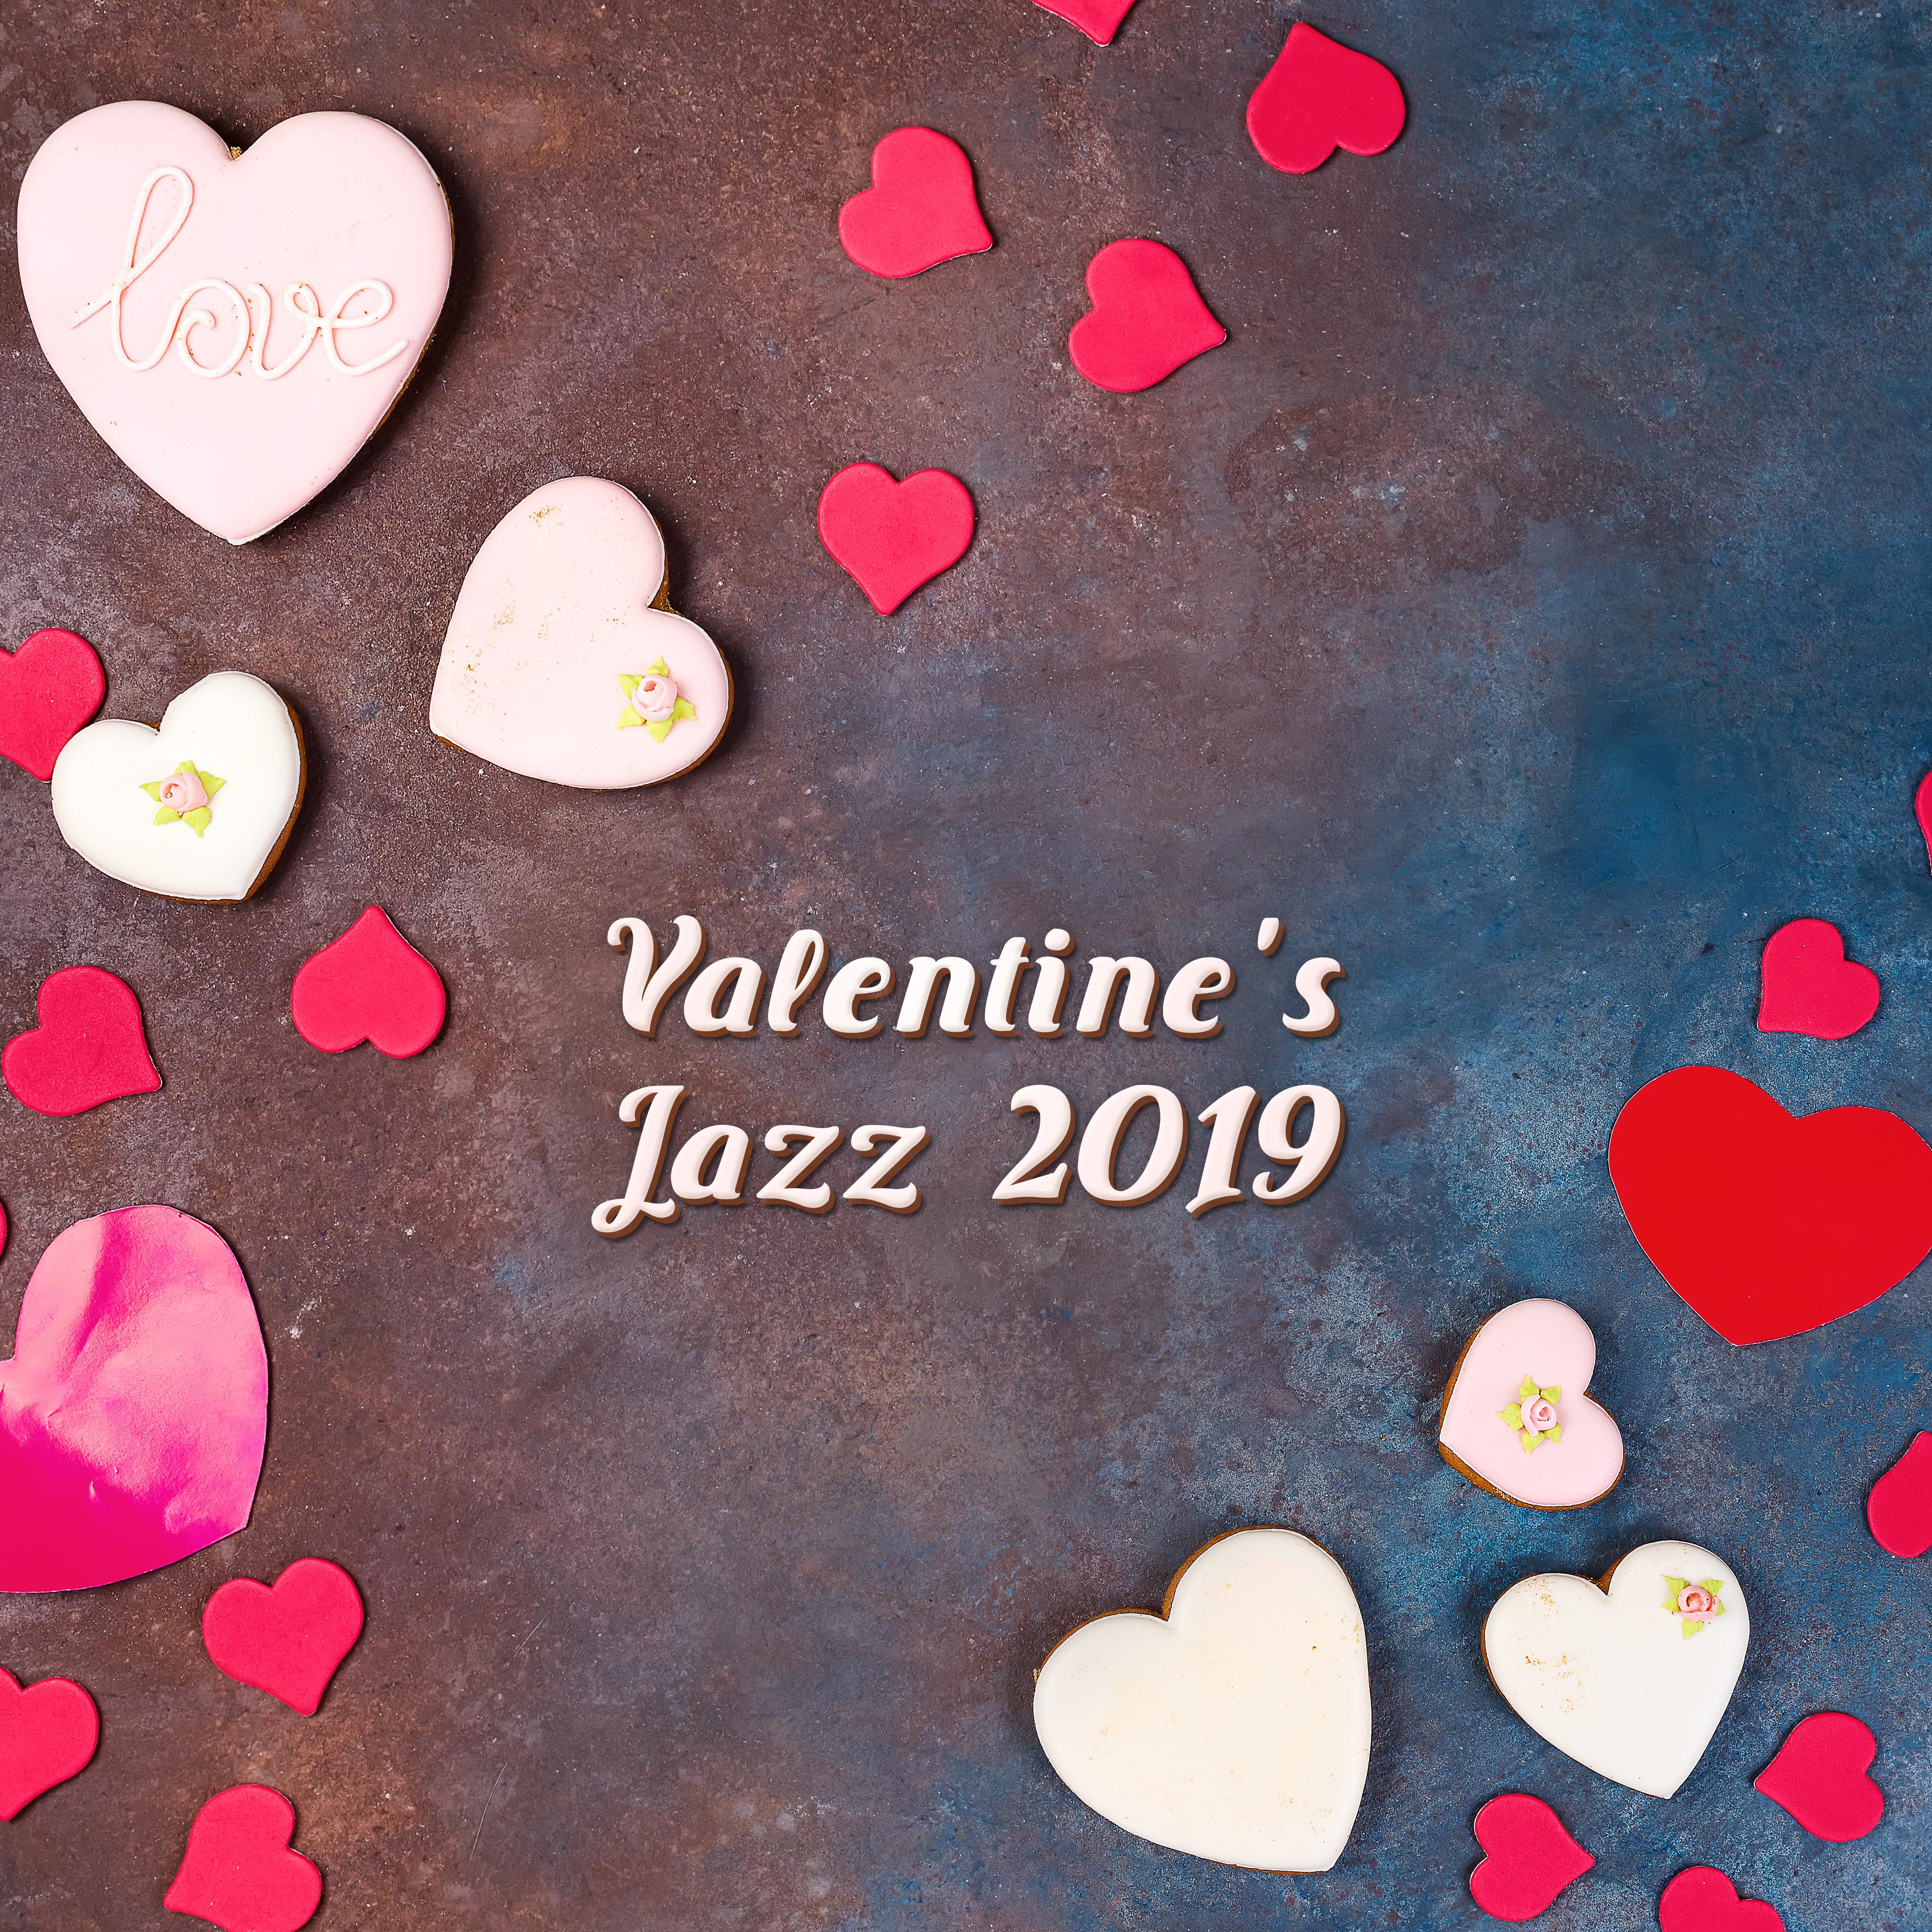 Valentine' s Jazz 2019  Jazz Relaxation, Sensual Songs, Erotic Music for Lovers, Pure Relaxation, Instrumental Jazz Music Ambient,  Music